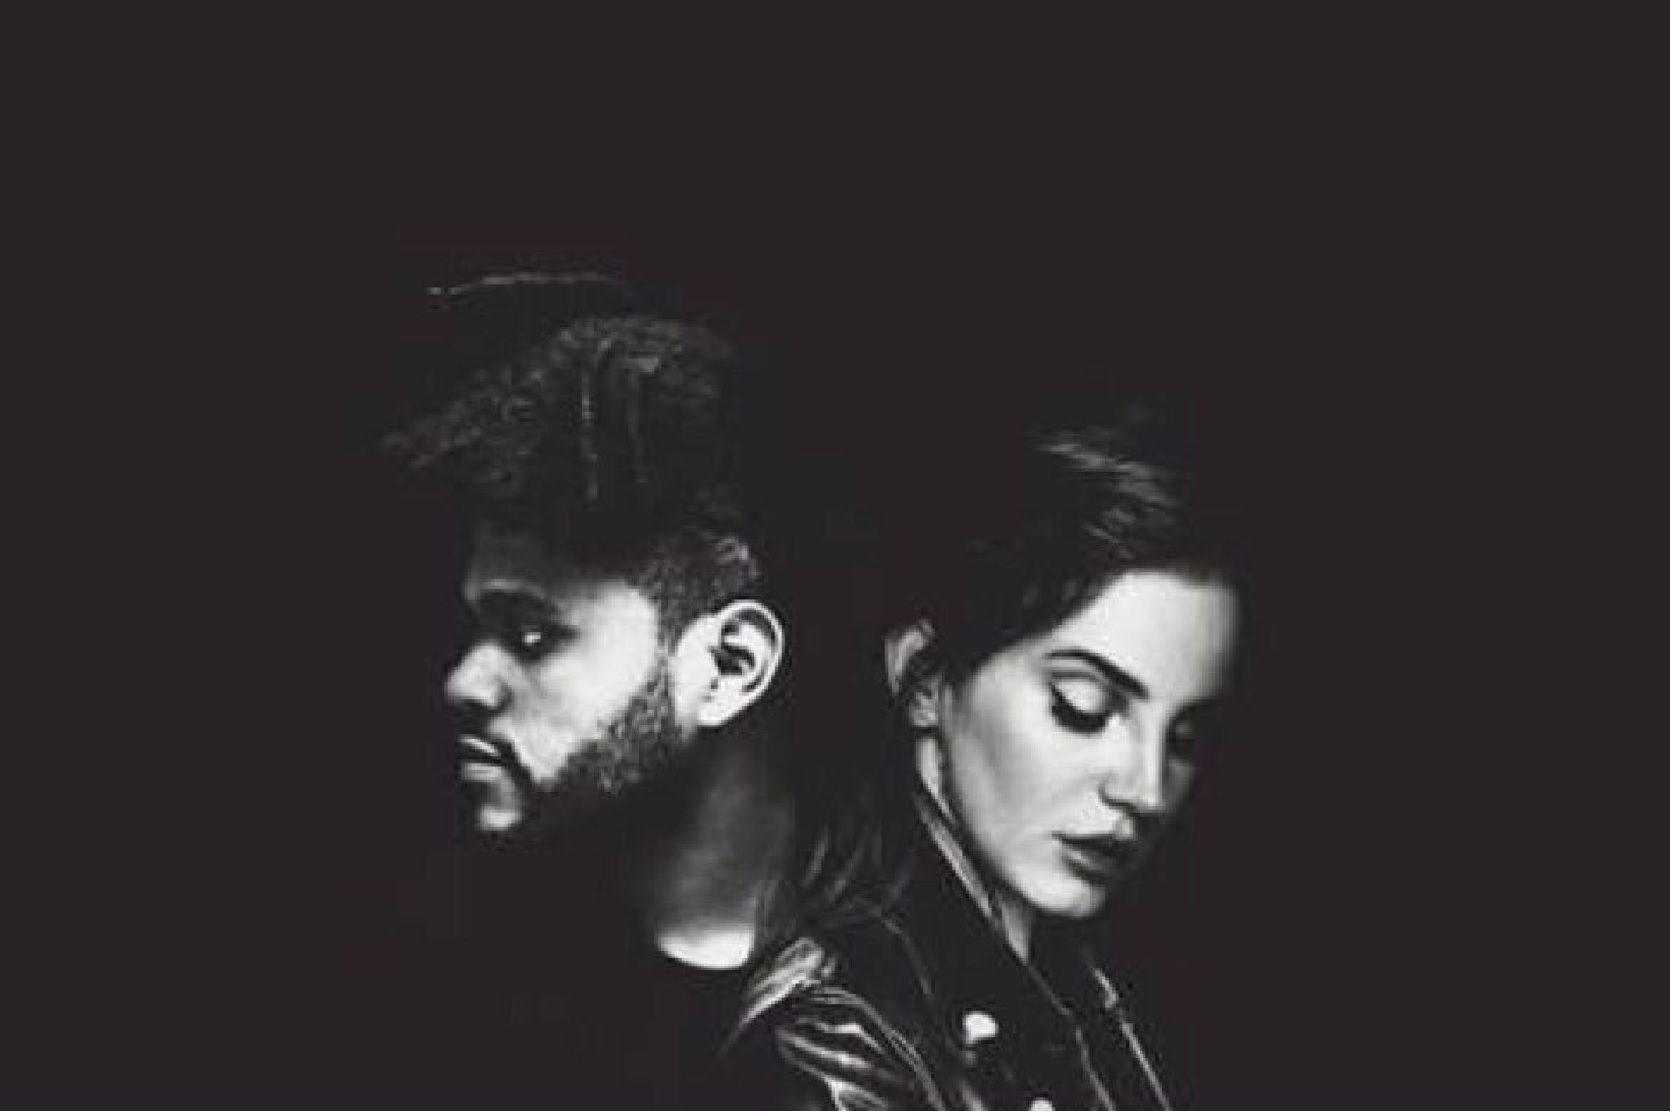 The Weeknd will be on Lana Del Rey's new album